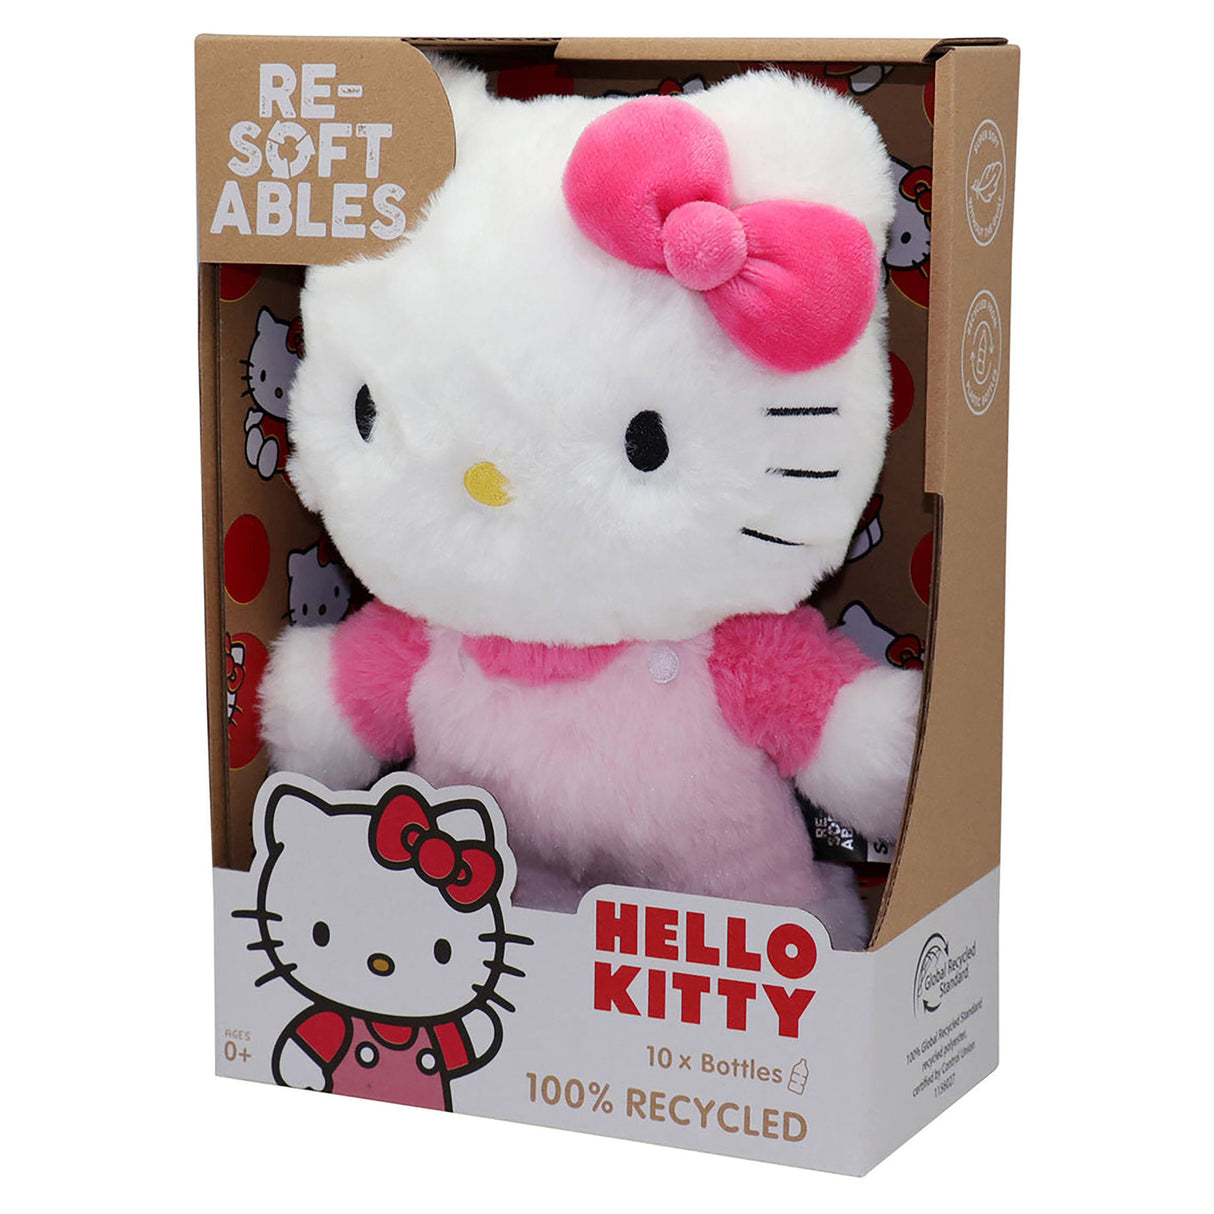 Hello Kitty Resoftables, Pink (10 inches)